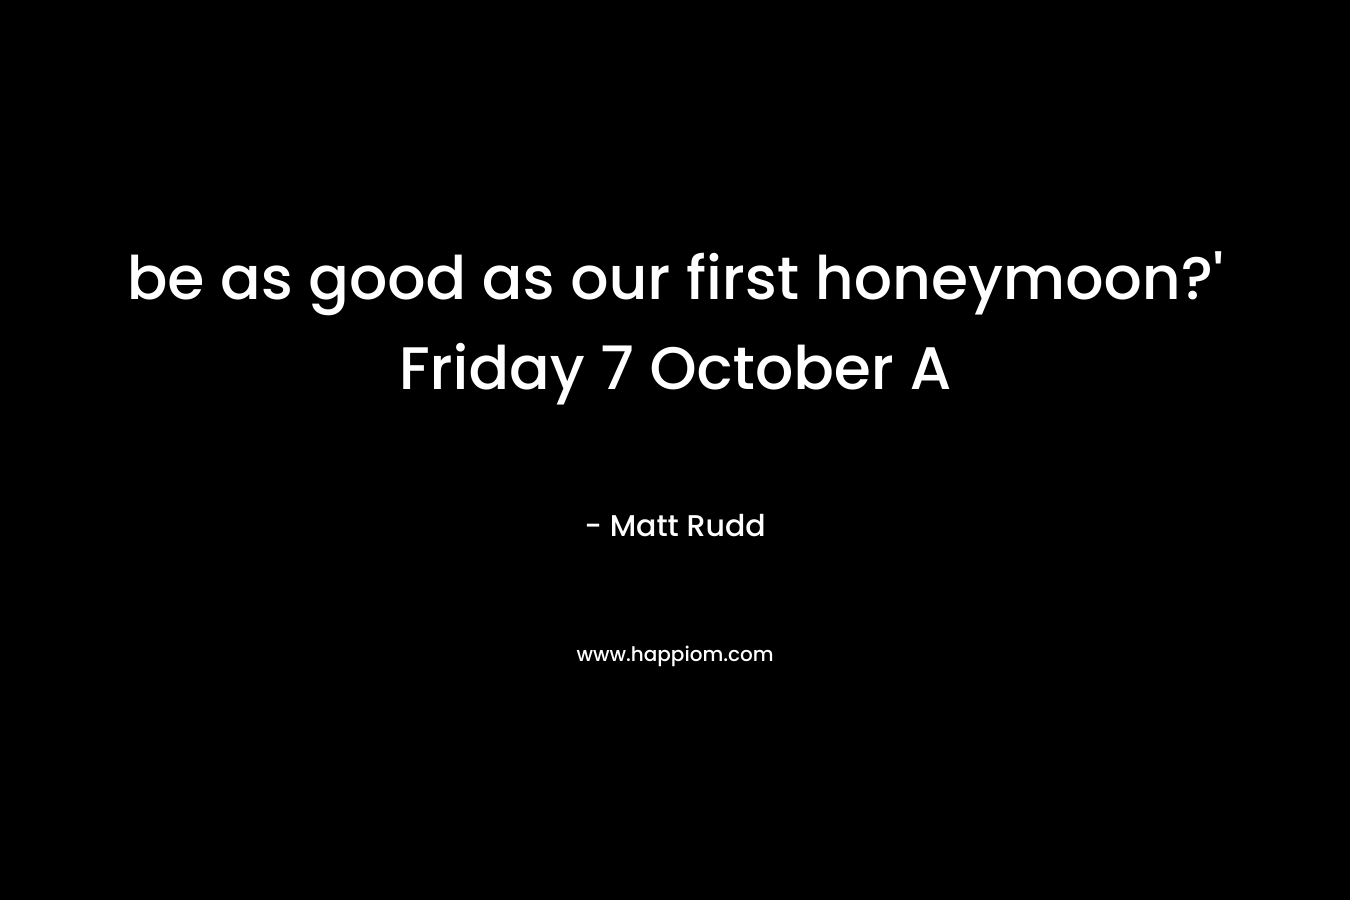 be as good as our first honeymoon?' Friday 7 October A